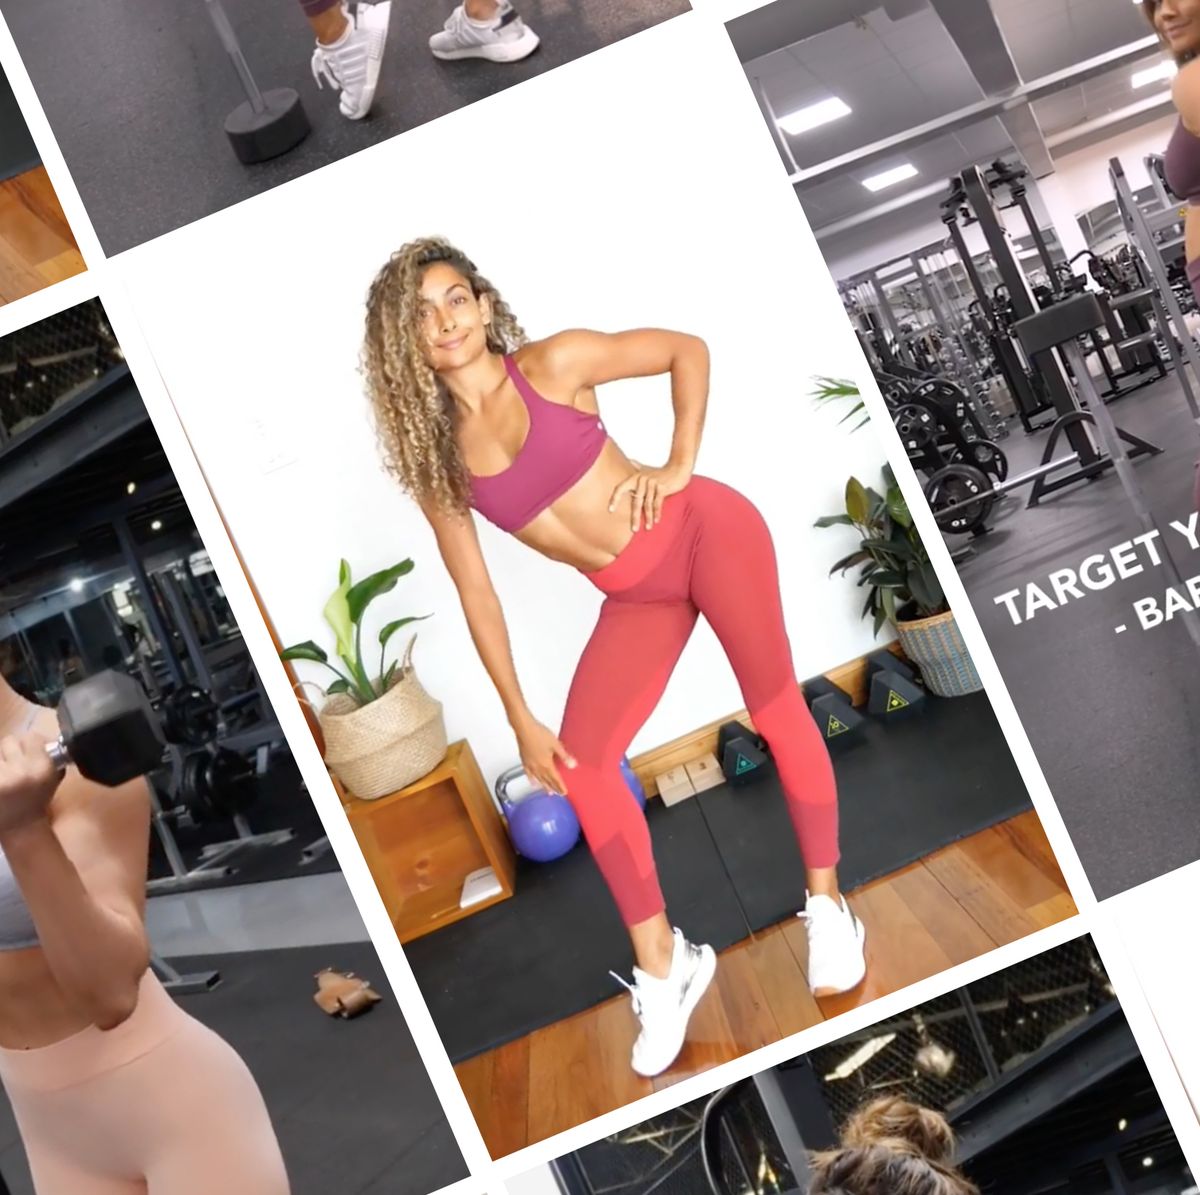 Group Porn Video Download Only 18years Girl - 31 Inspiring Fit Girls On Instagram - Workout Motivation From Female  Fitness Models